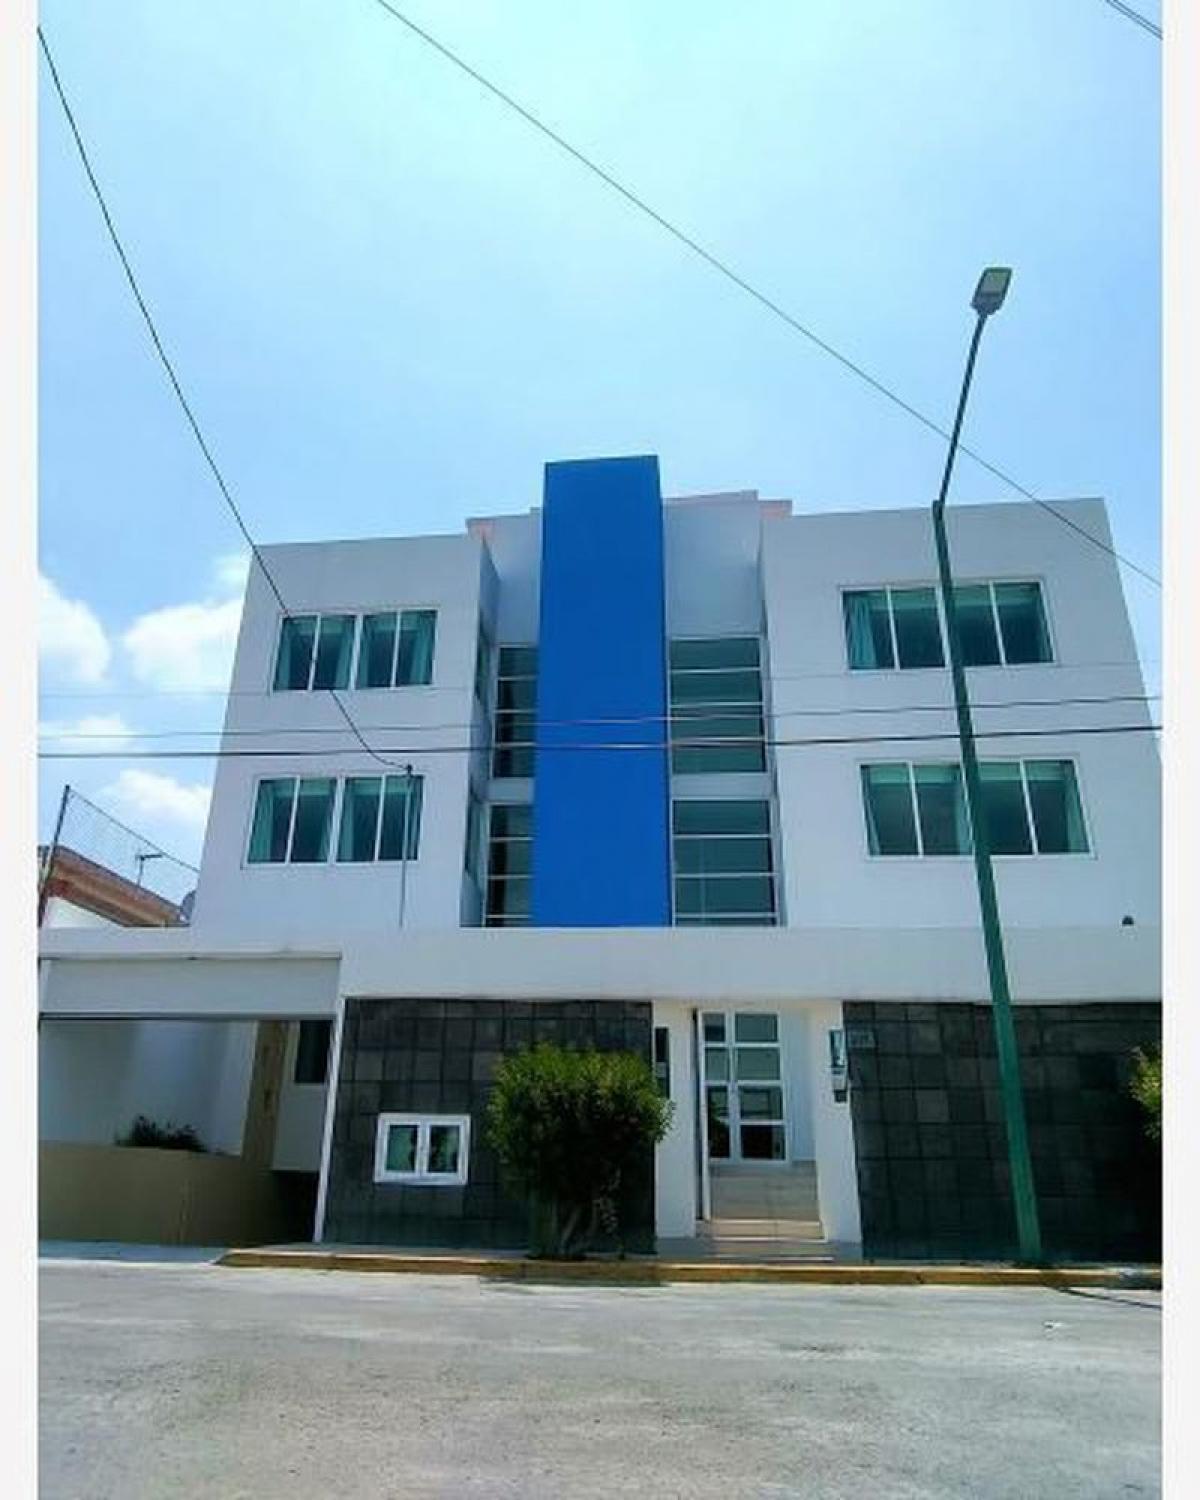 Picture of Apartment For Sale in Toluca, Mexico, Mexico